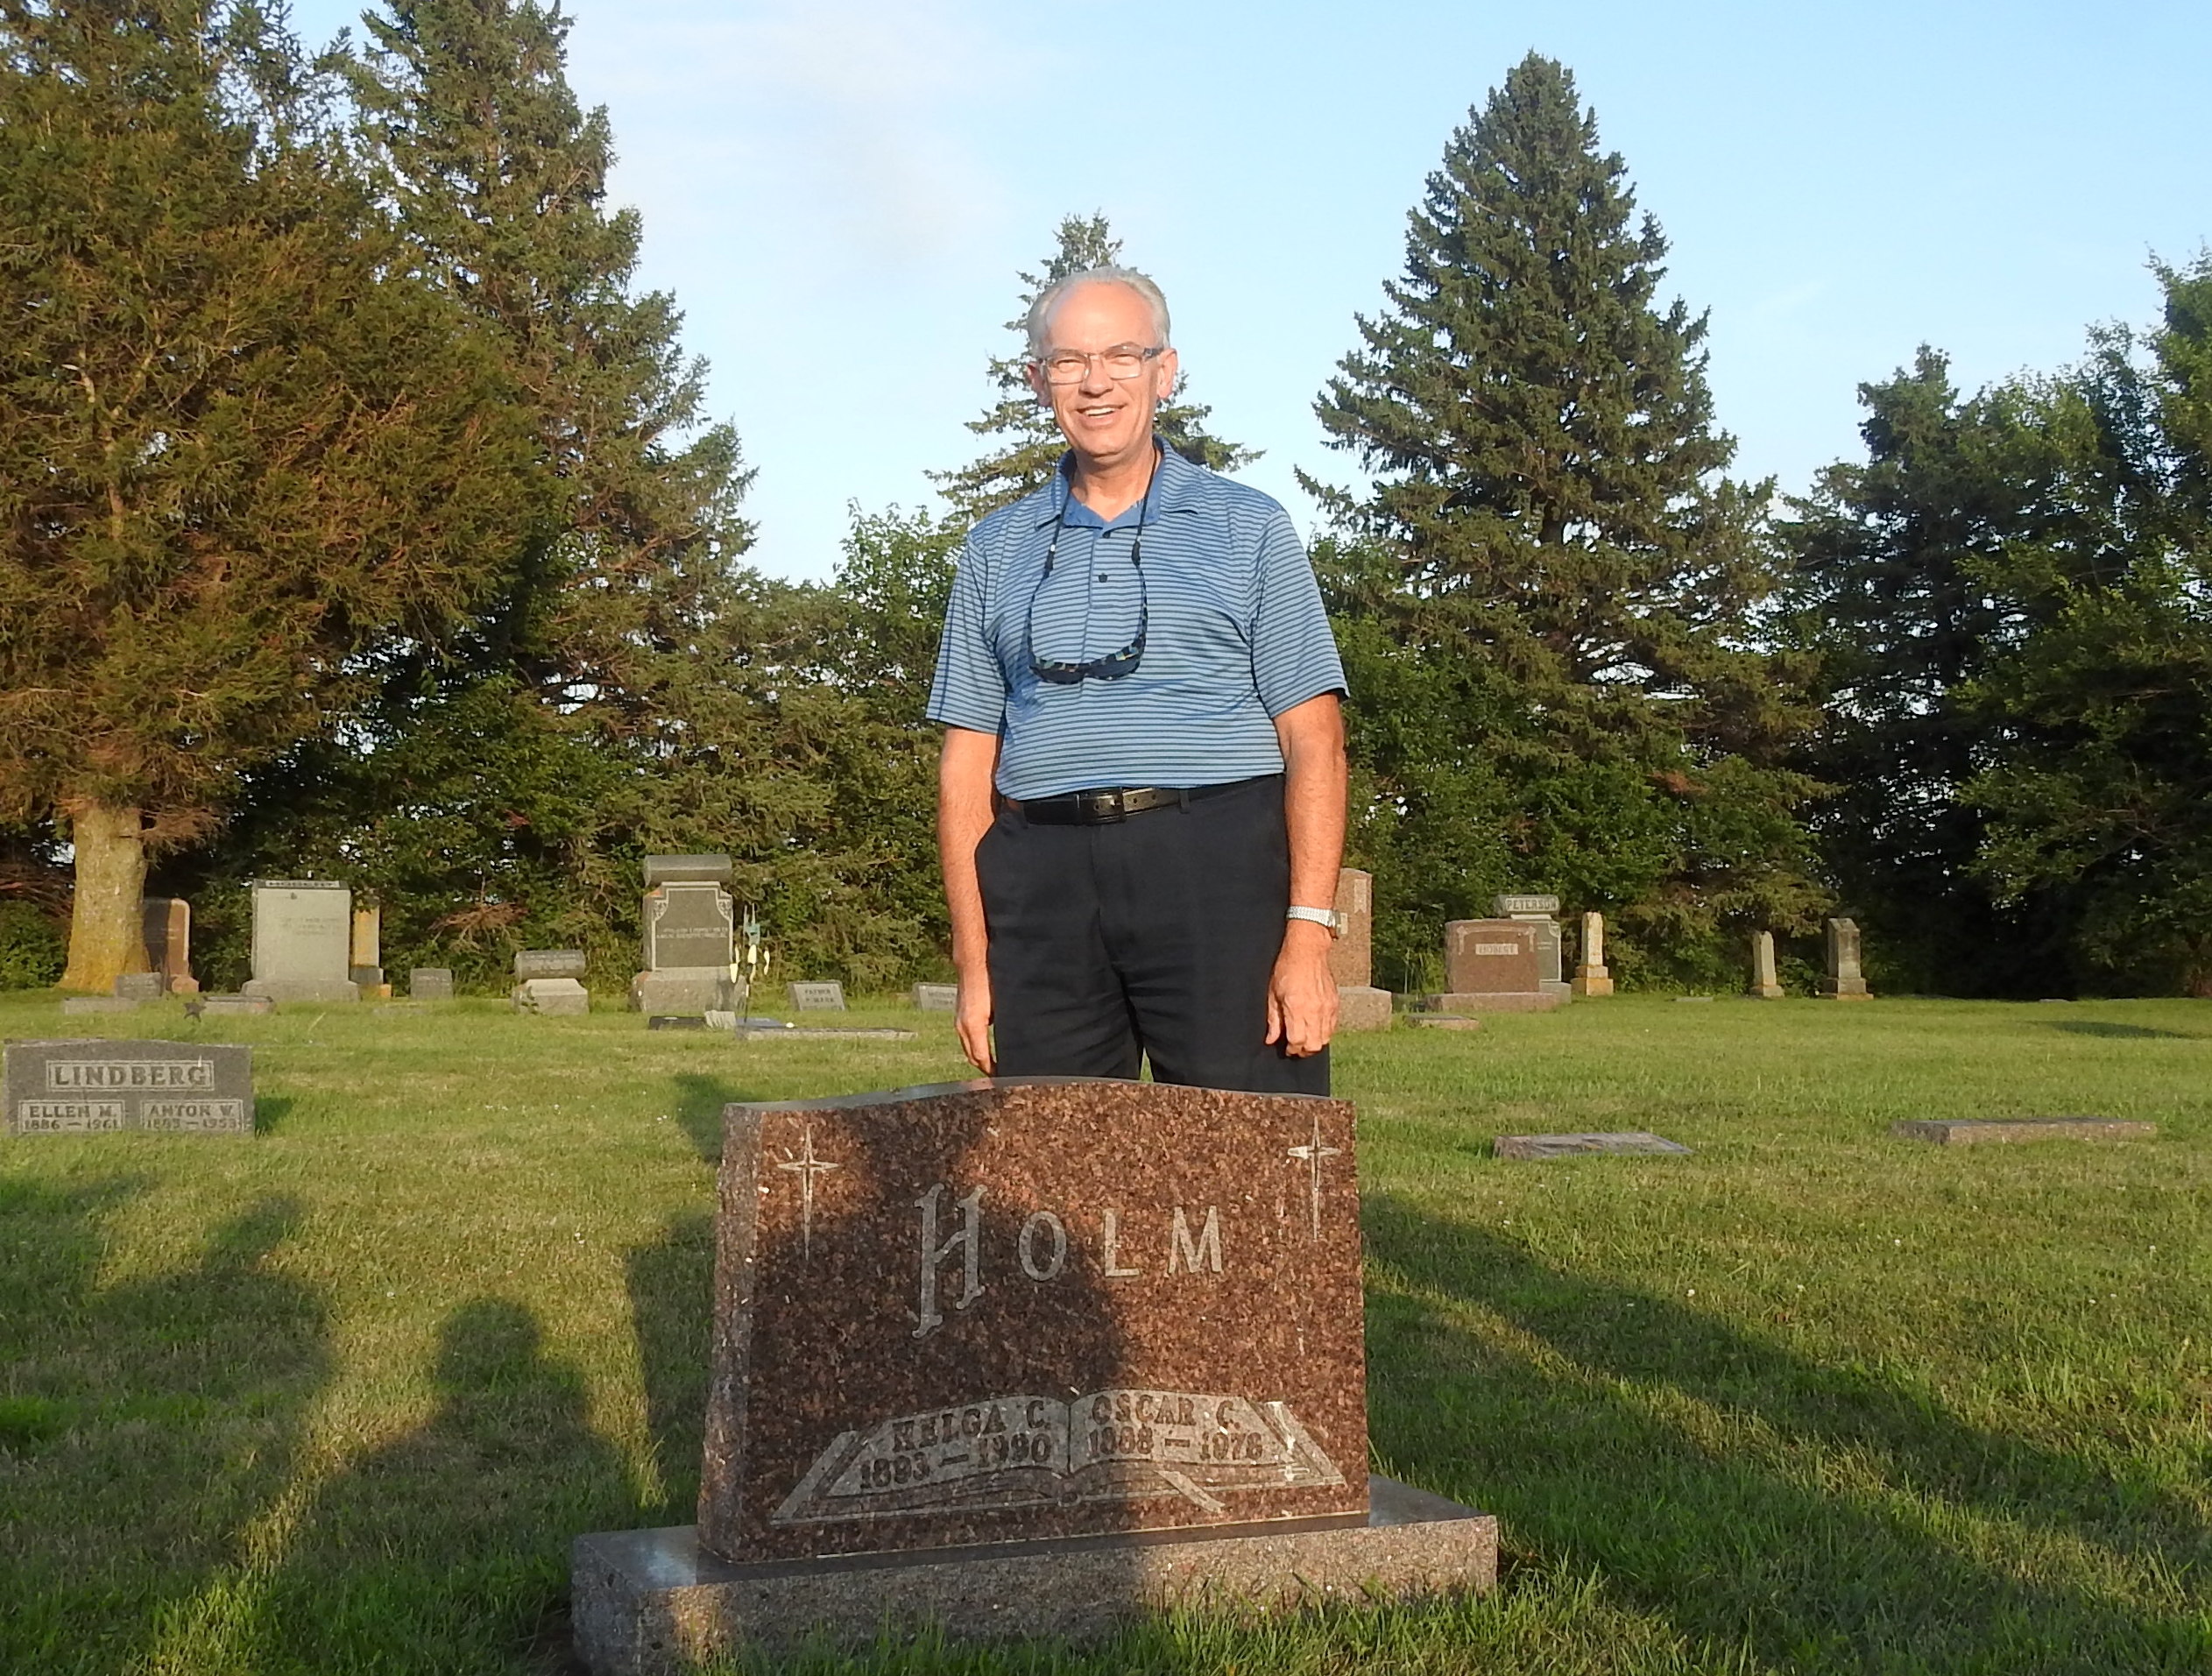 Mark standing at the Holm stone